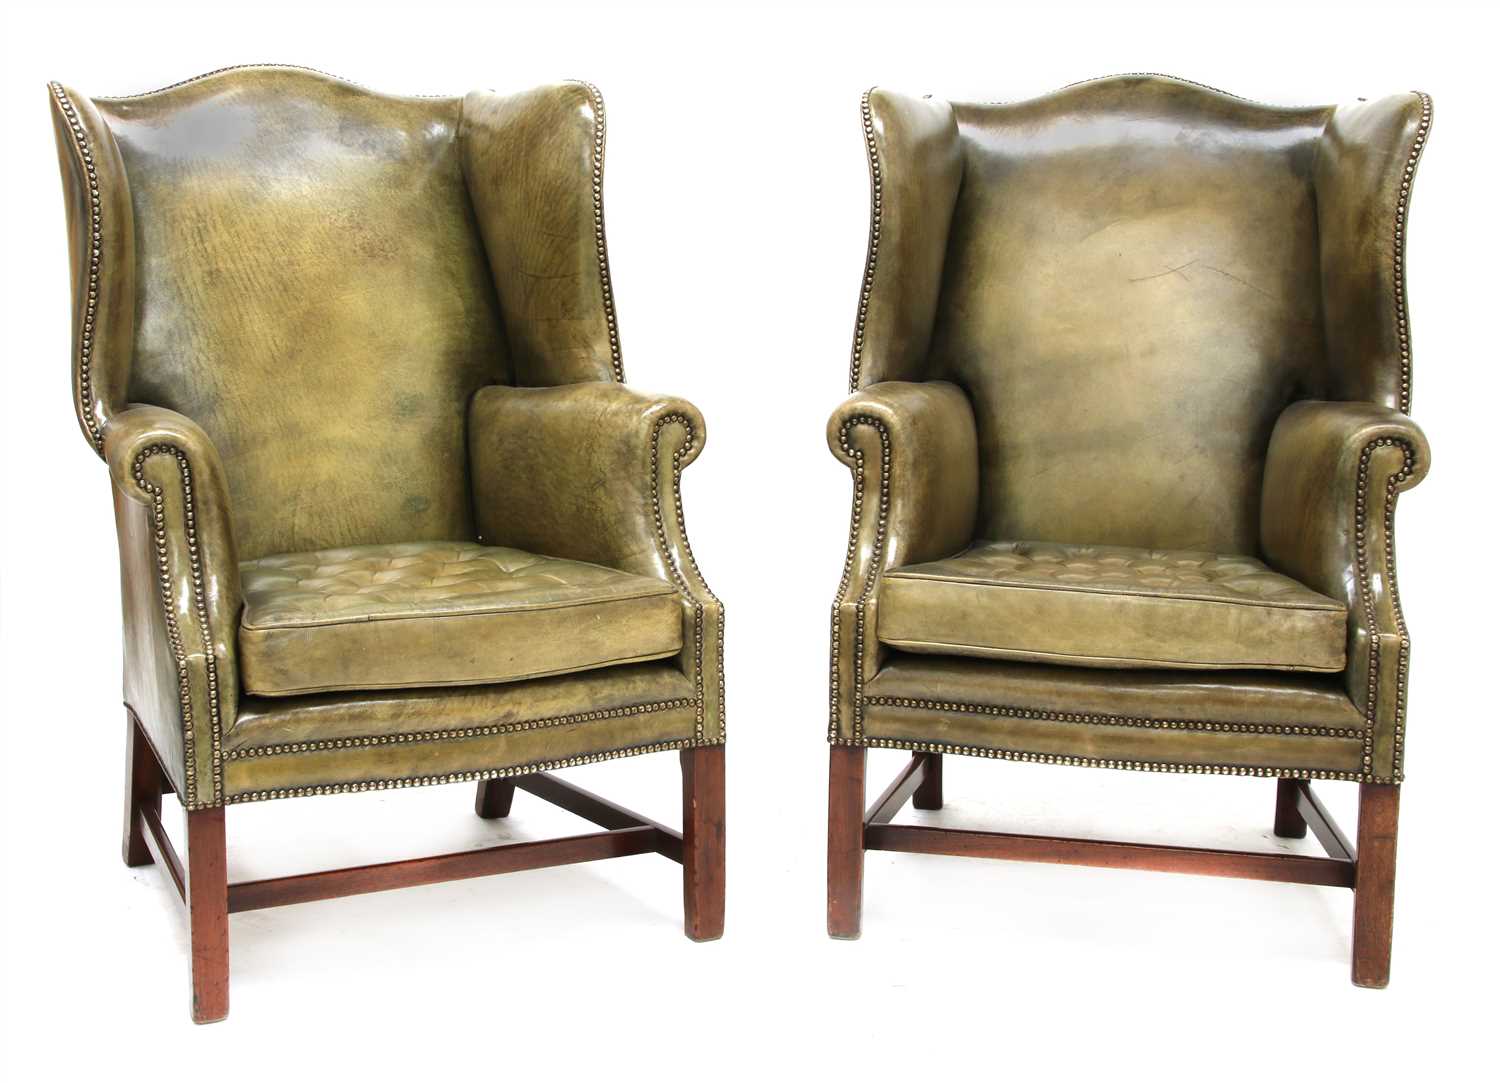 Lot 105 - A pair of George III-style wing armchairs